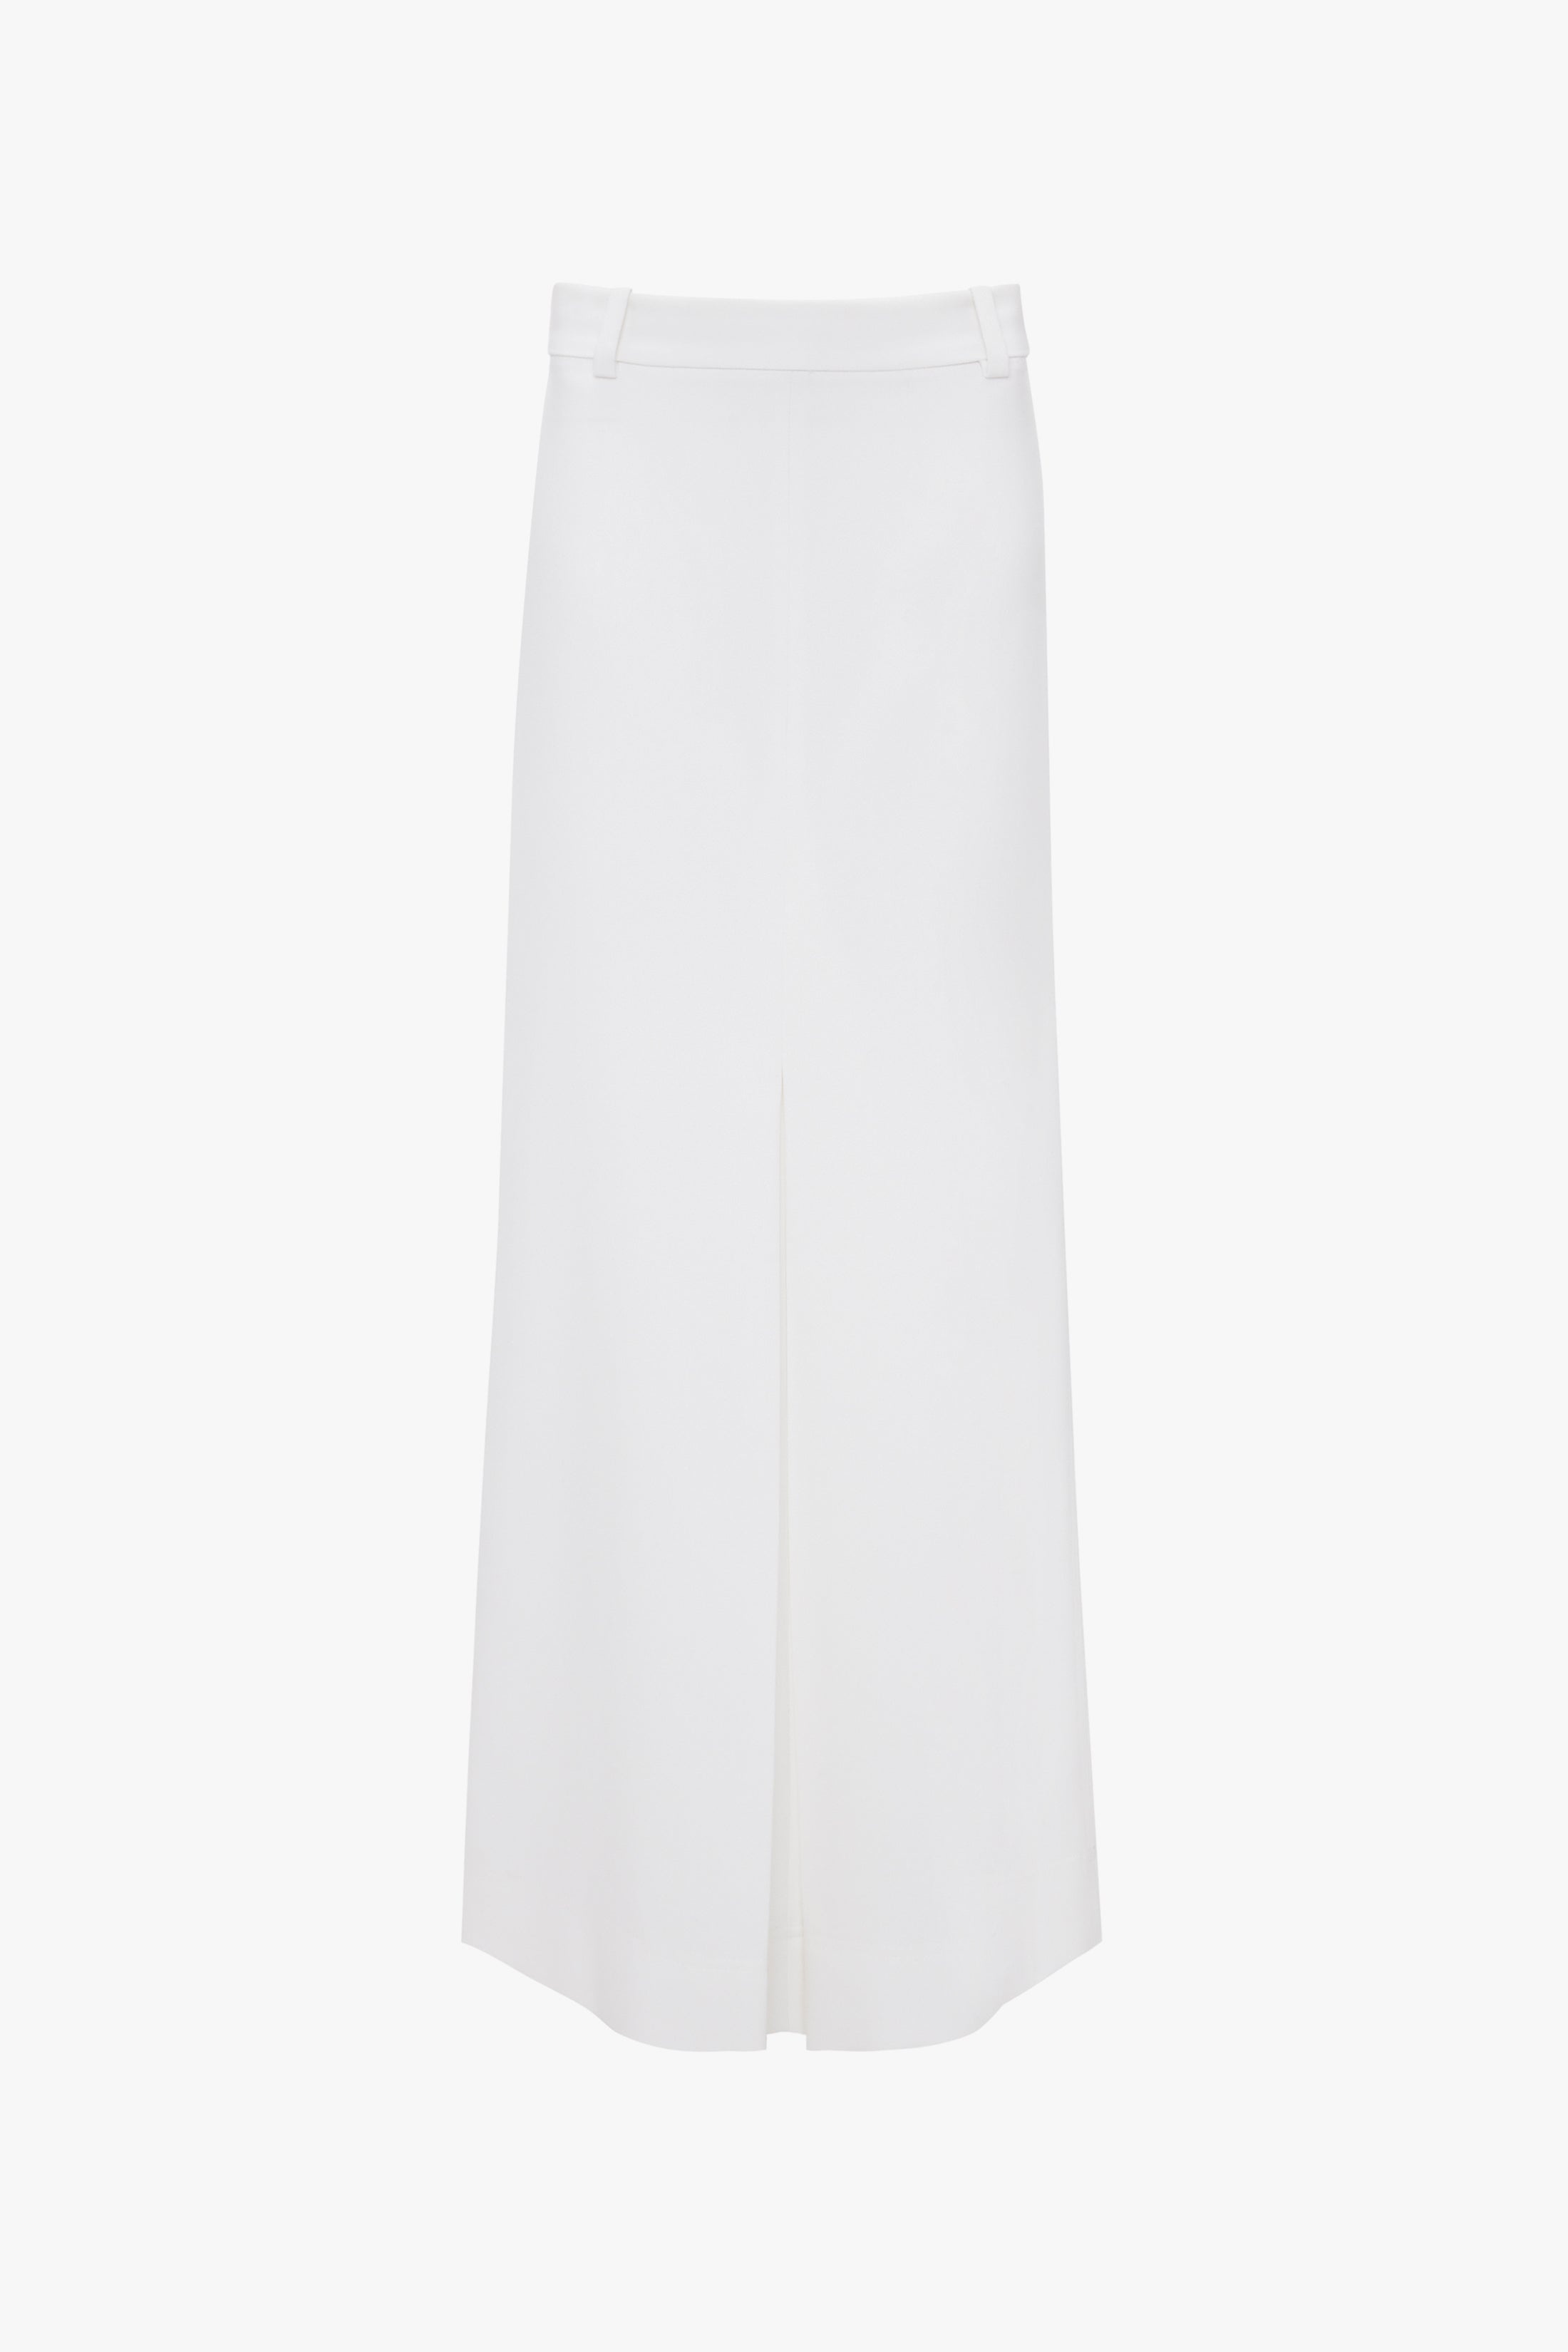 Exclusive Tailored Floor-Length Pleated Skirt In Ivory - 1